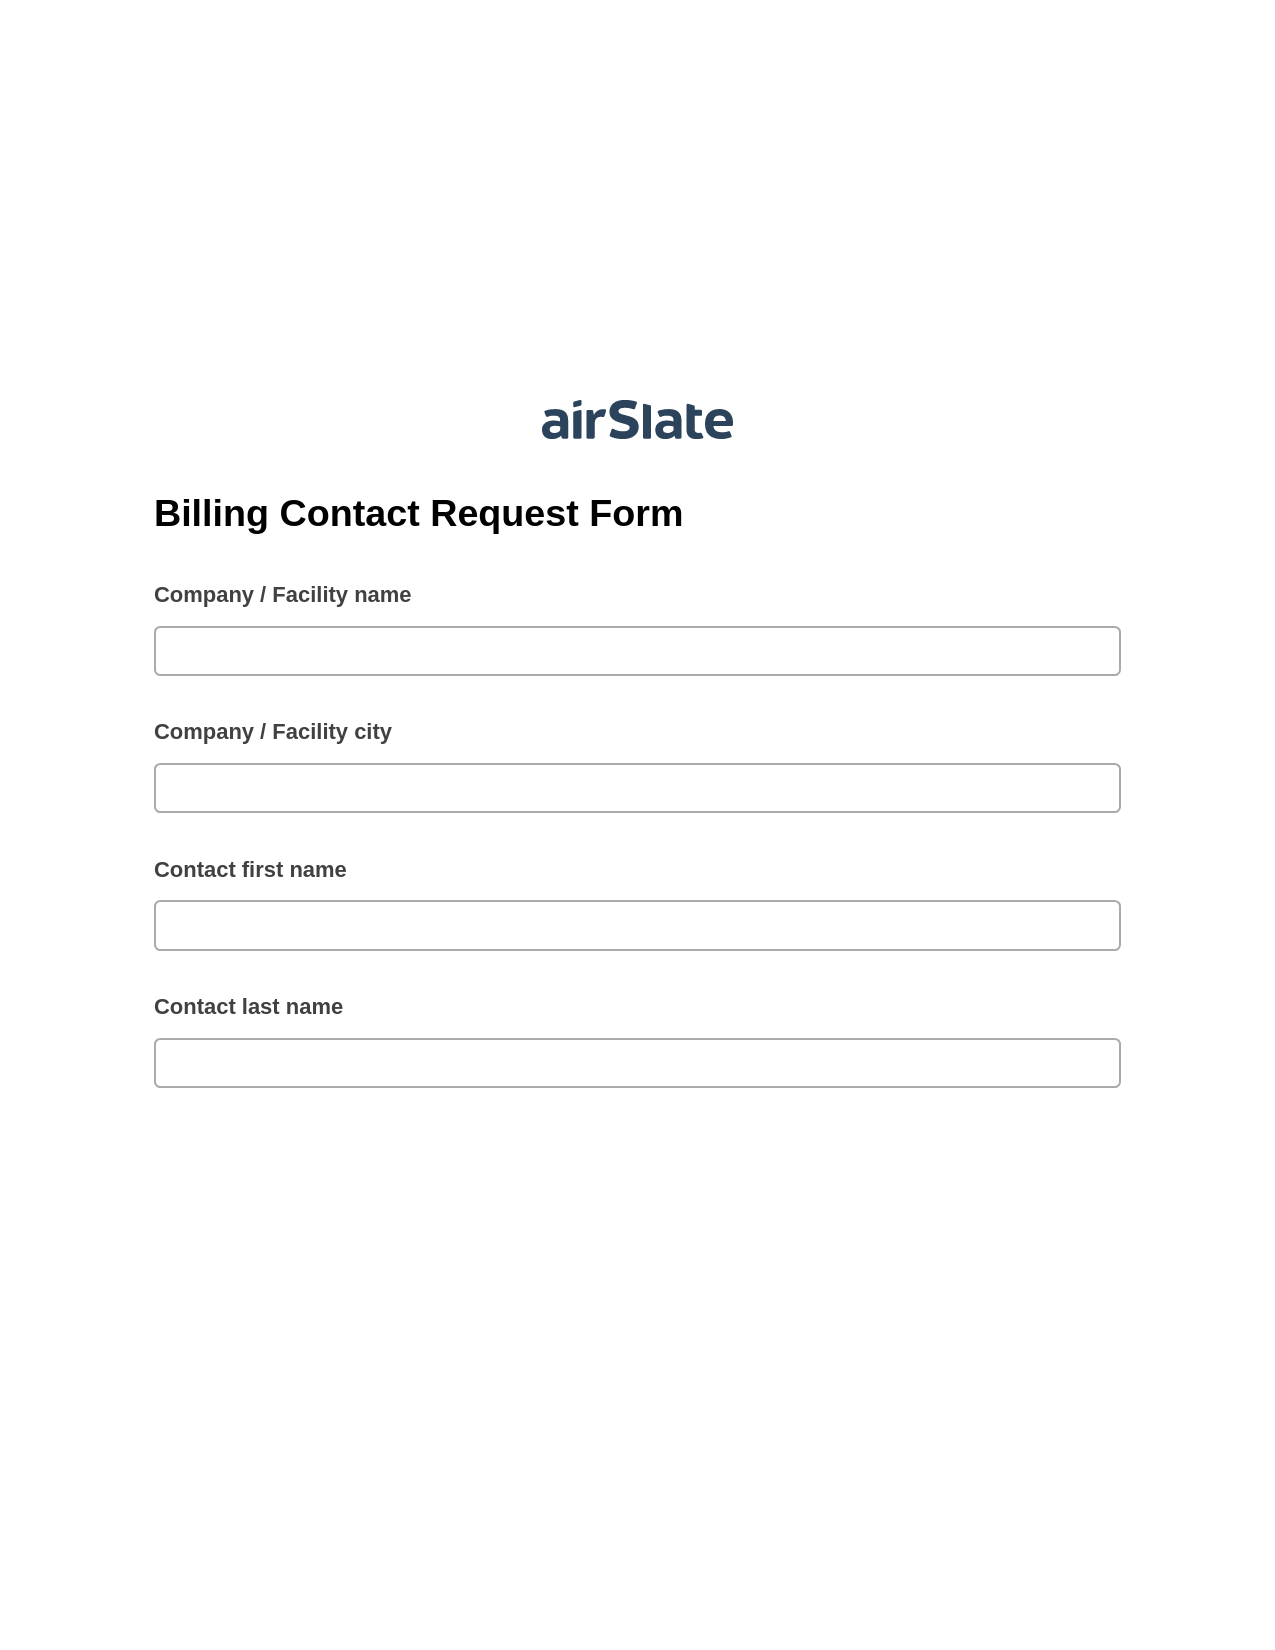 Billing Contact Request Form Pre-fill from MySQL Bot, Set Signature Type Bot, Export to Smartsheet